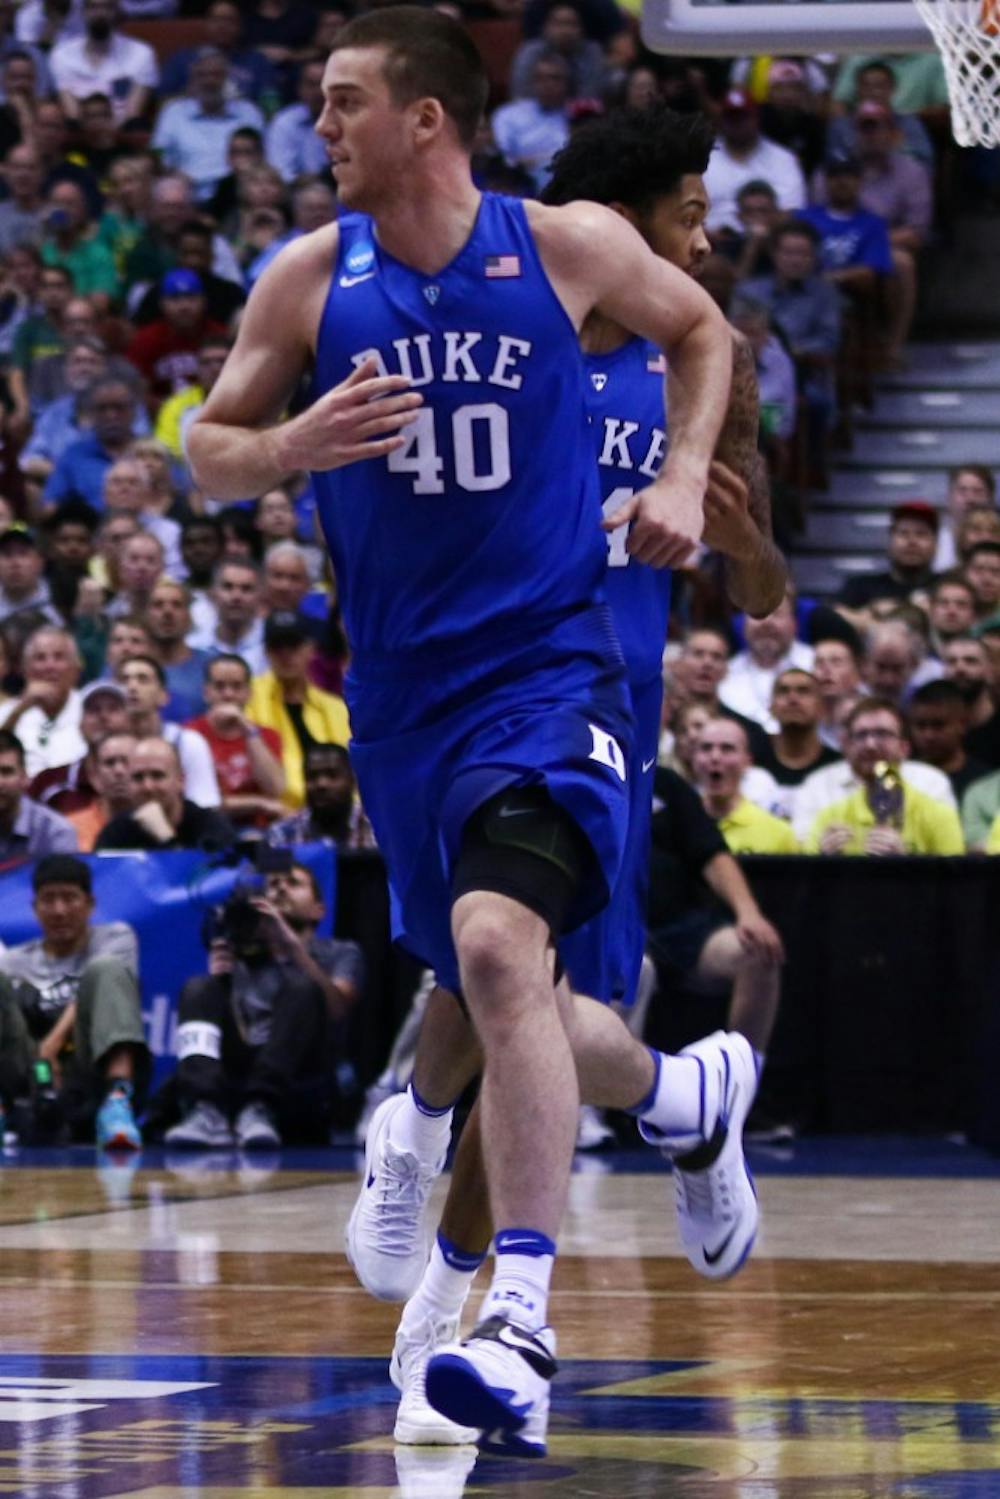 <p>Marshall Plumlee's Duke career came to an end Thursday with six points and five rebounds in the Sweet 16 loss to Oregon.</p>